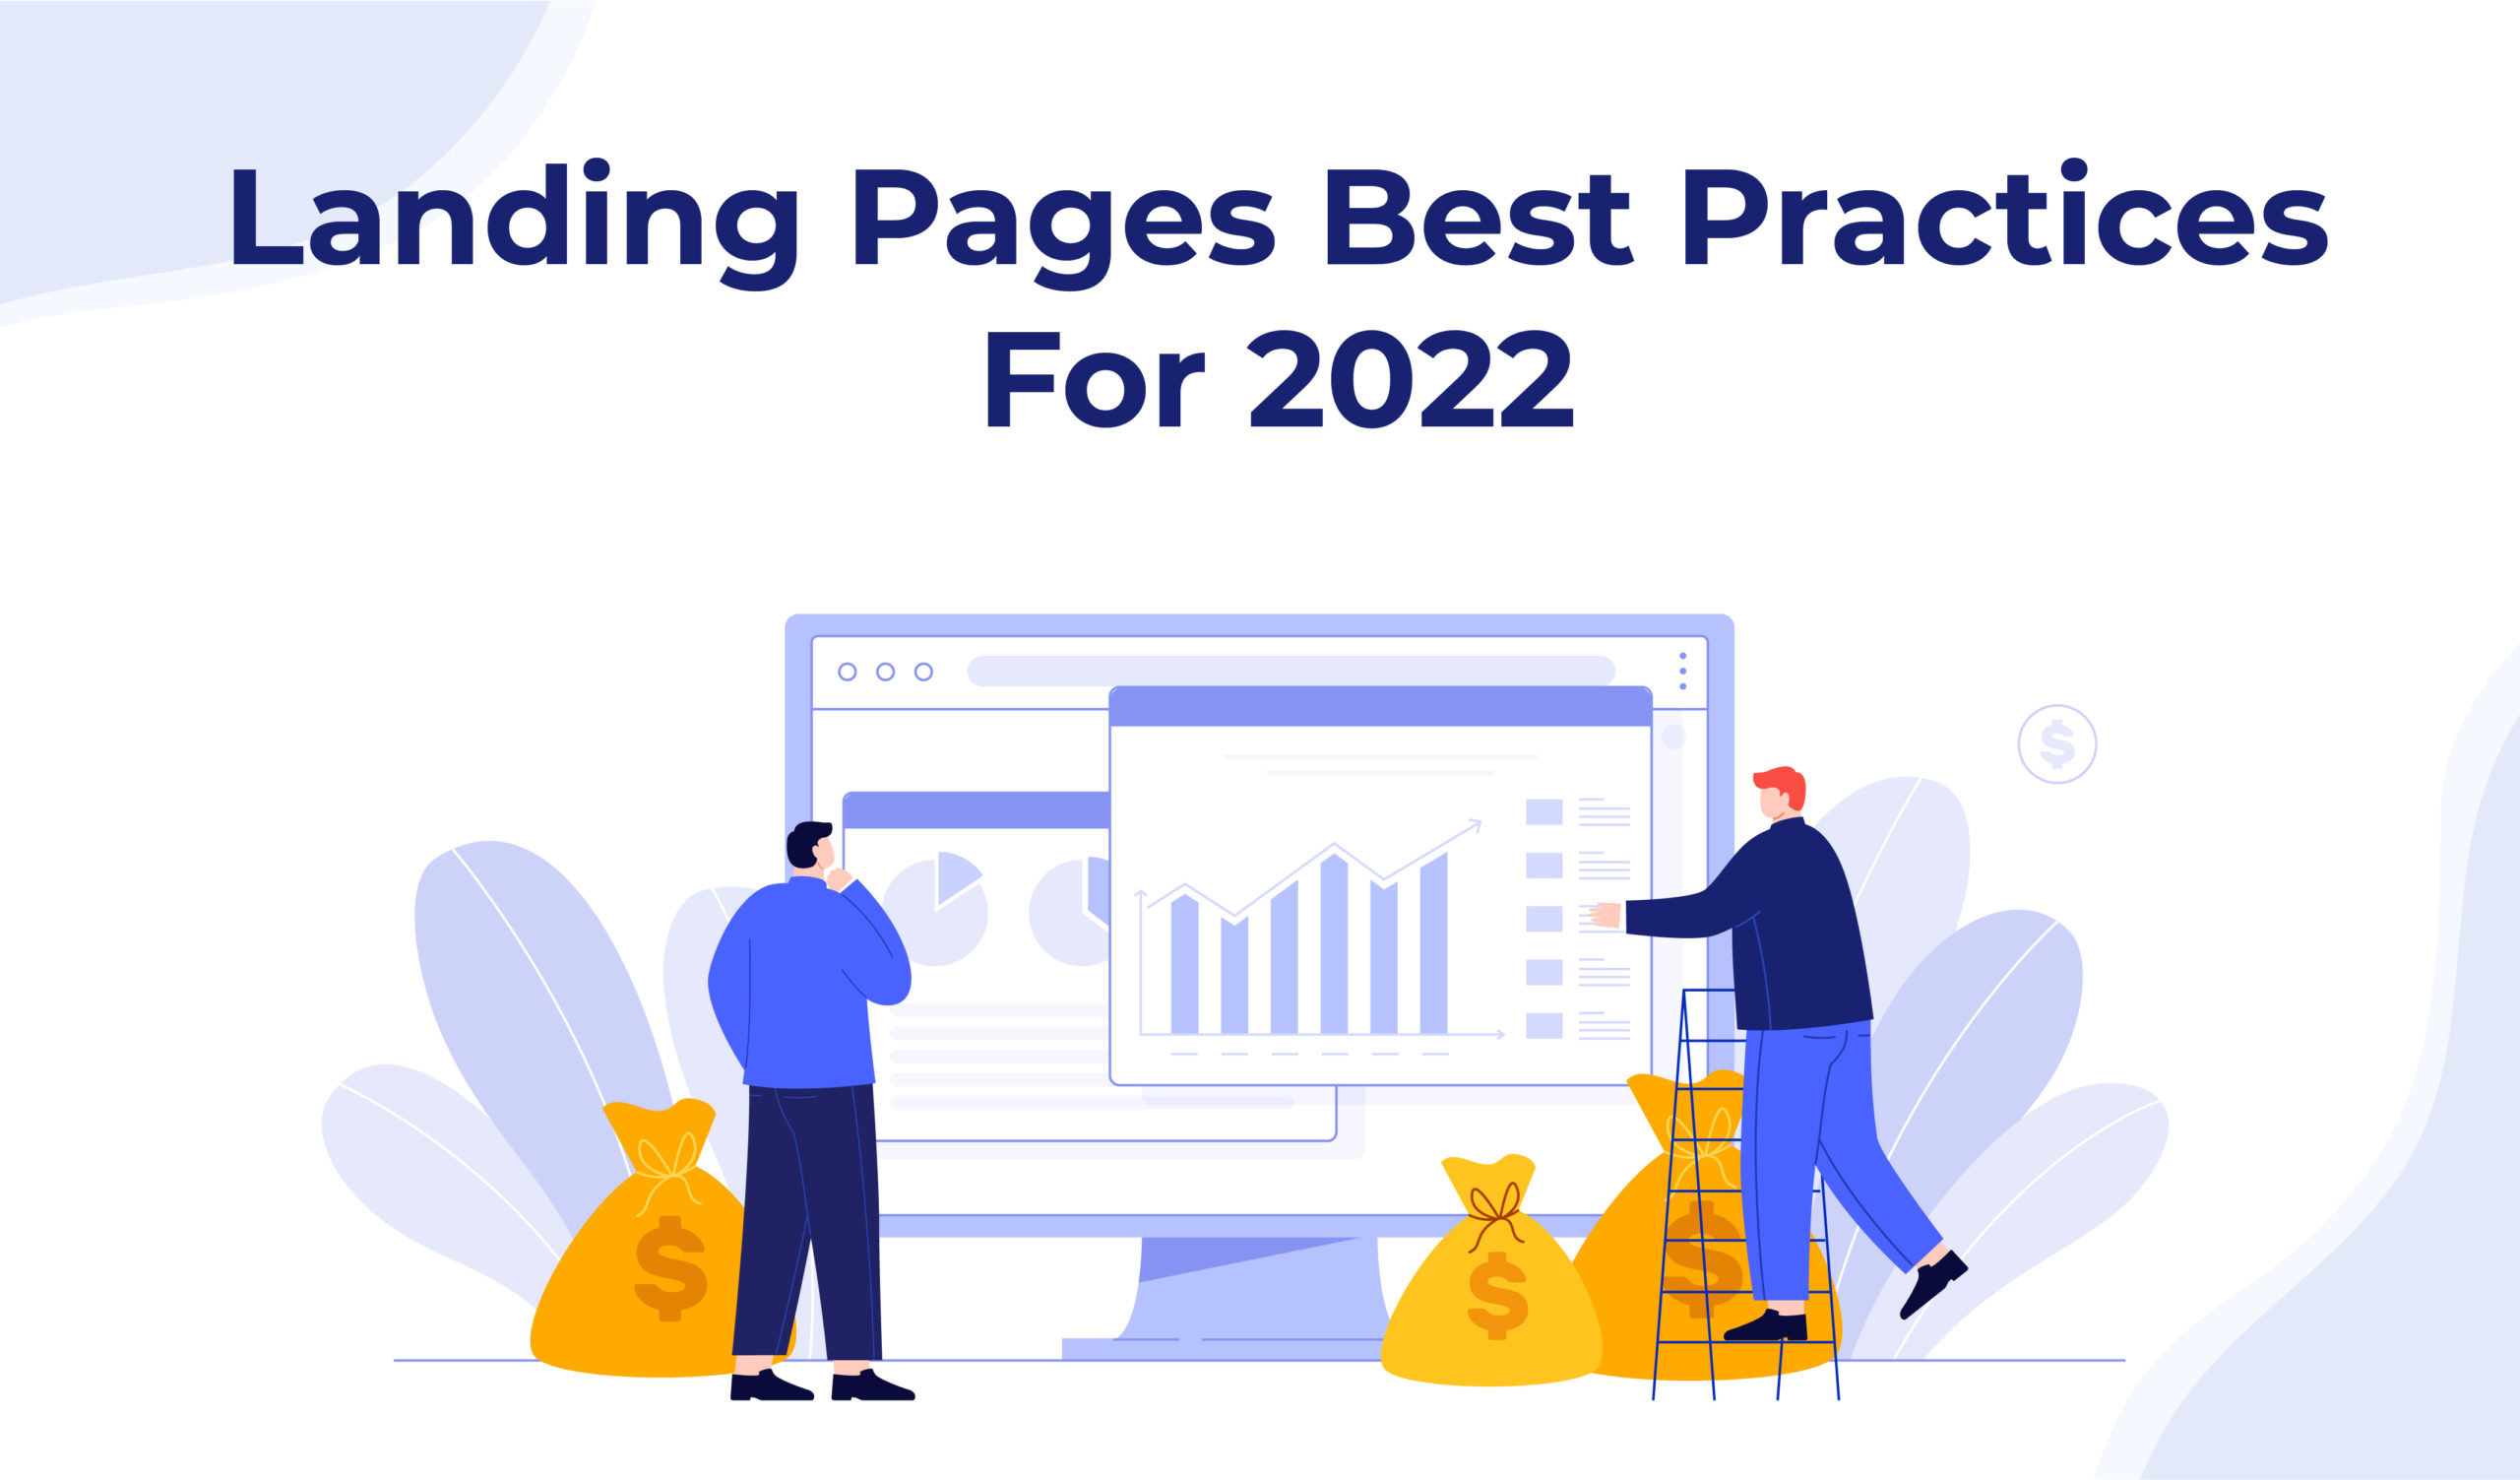 Landing Pages Best Practices For 2022